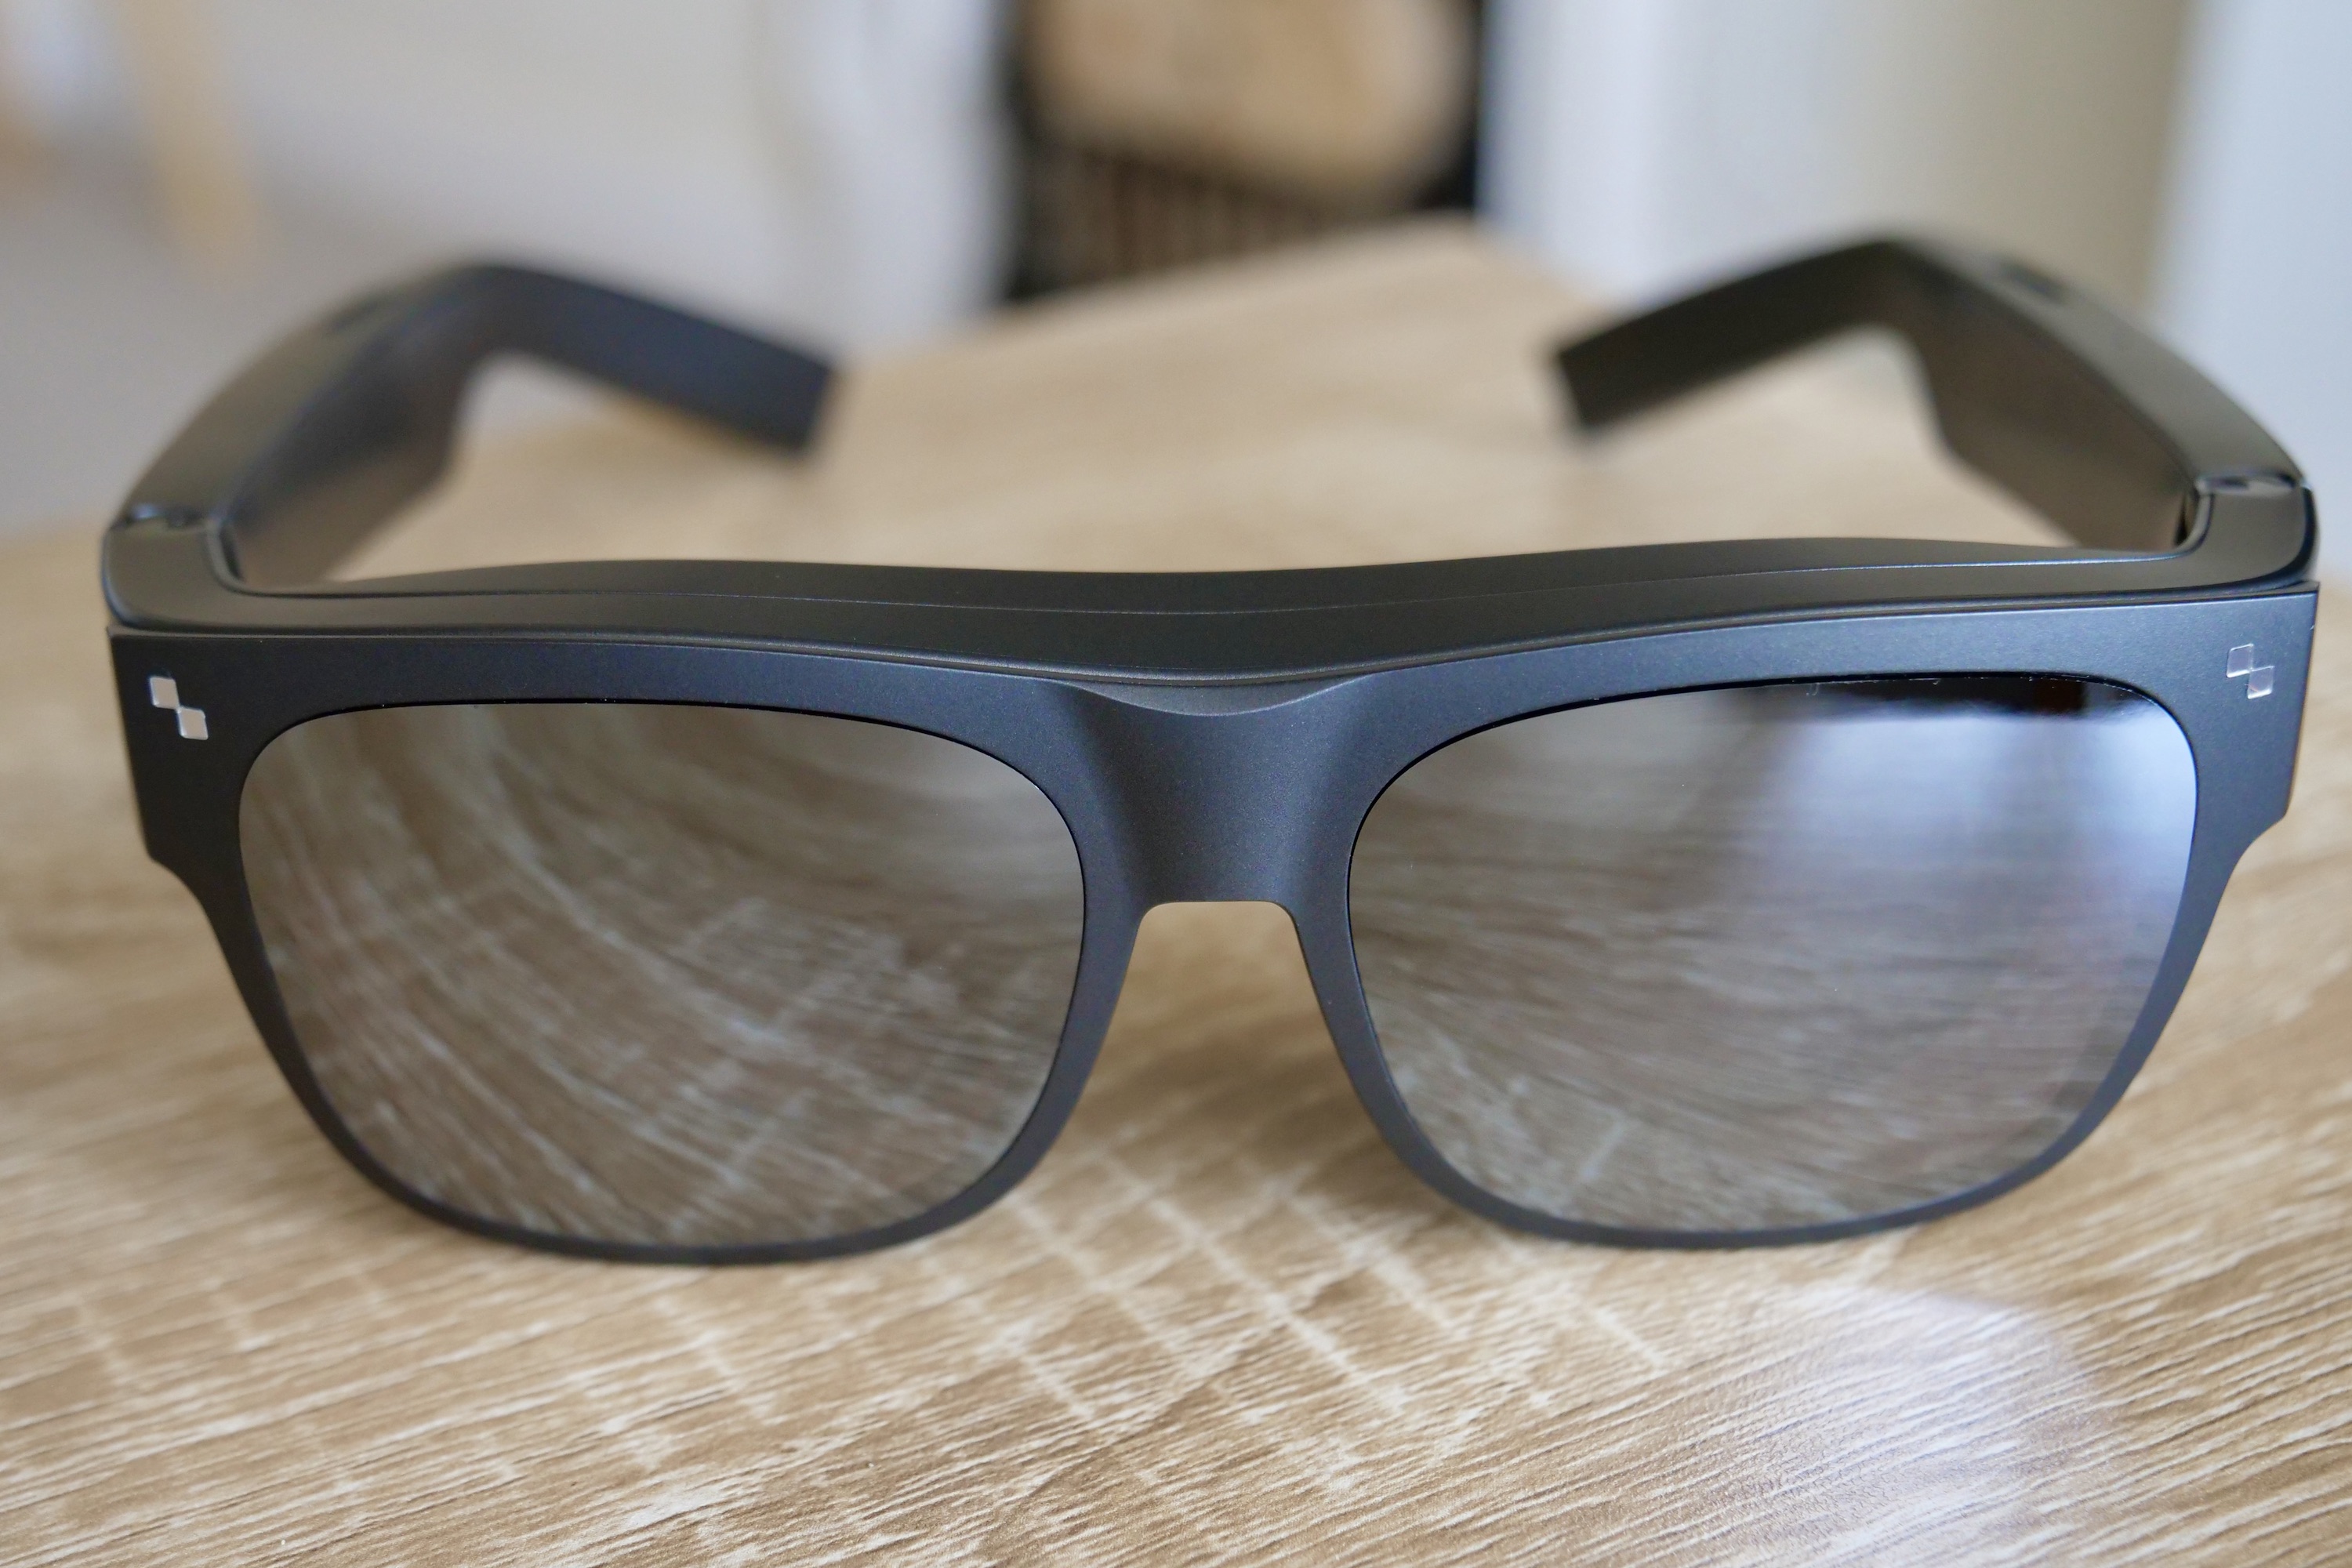 The front of the TCL NXTWEAR S, with the sunglasses accessory attached.